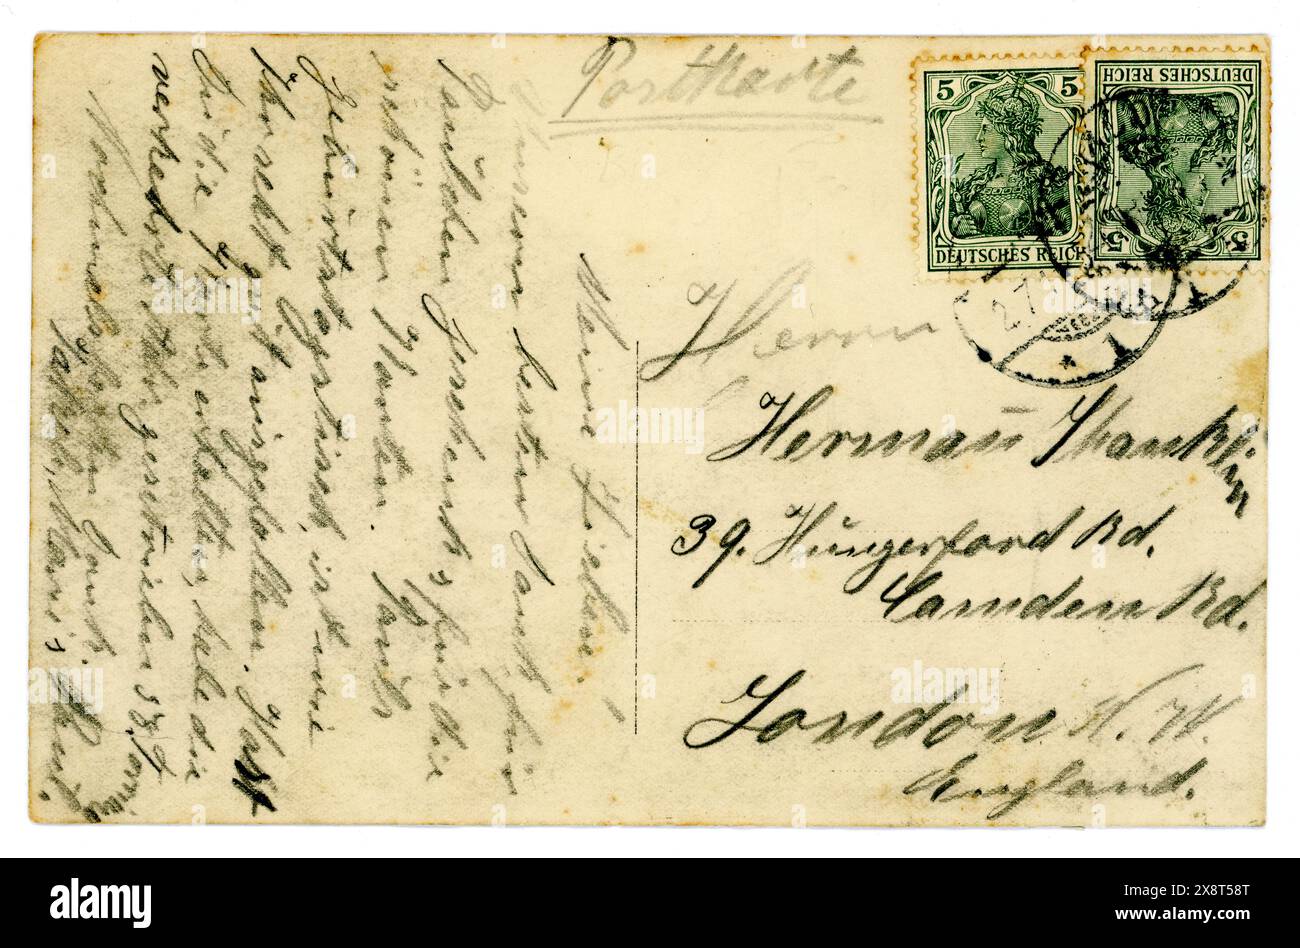 Reverse of original early 1900's handwritten postcard. Dated 23 June 1911 . Posted to London from Germany with 5  Pfennig Deuteches Reich (German Reich or Empire) stamps. Stock Photo